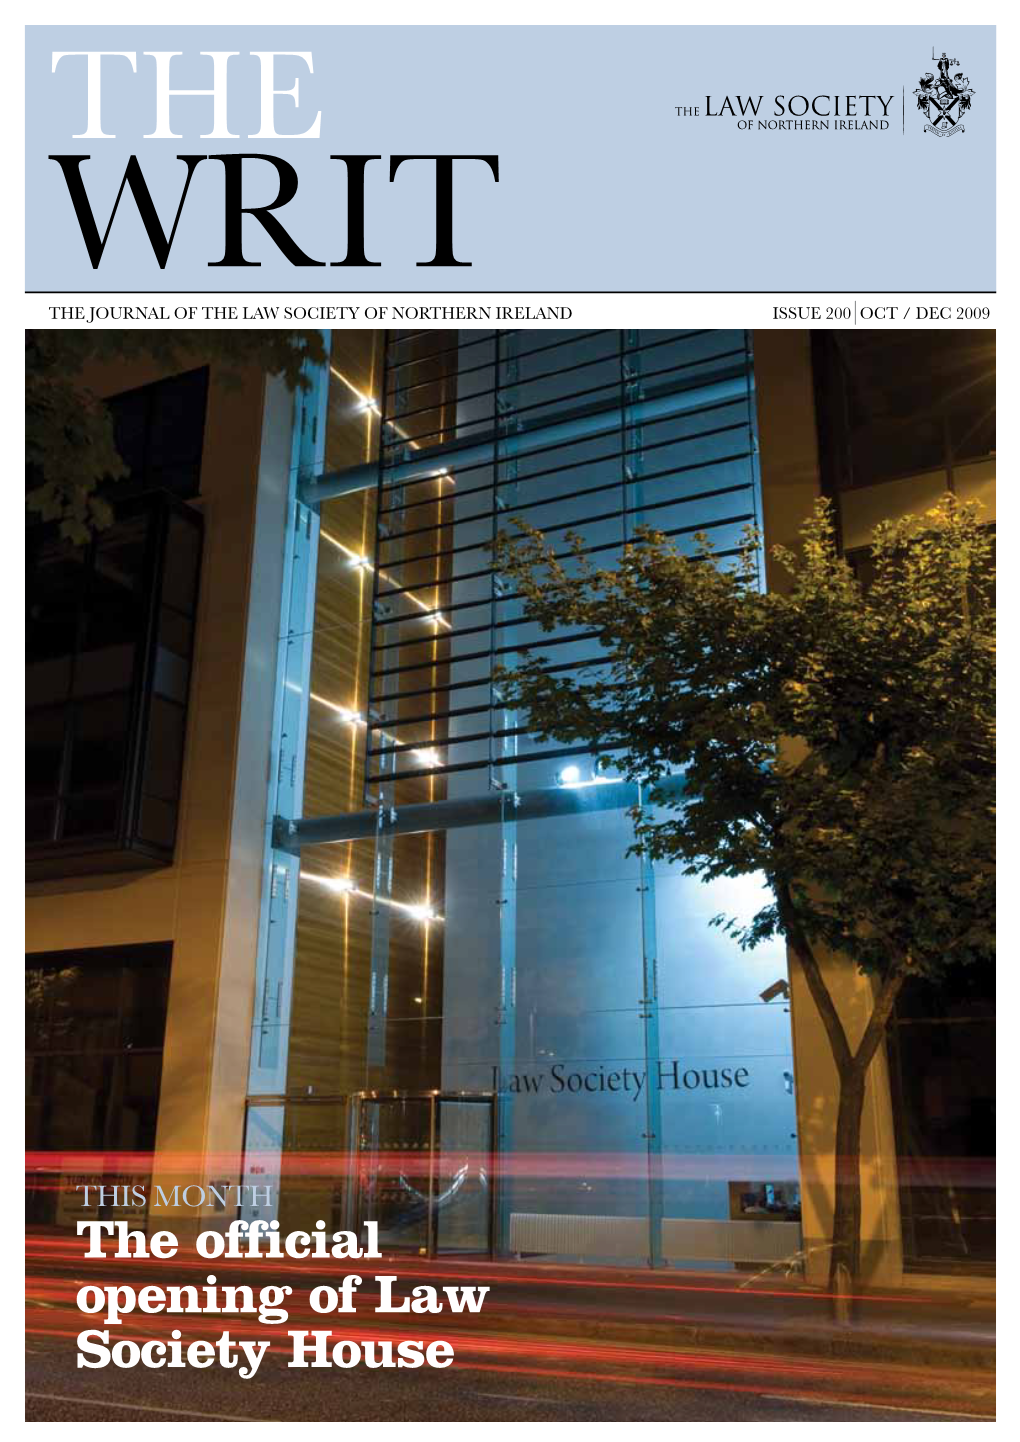 Writ the Journal of the Law Society of Northern Ireland ISSUE 200 Oct / Dec 2009